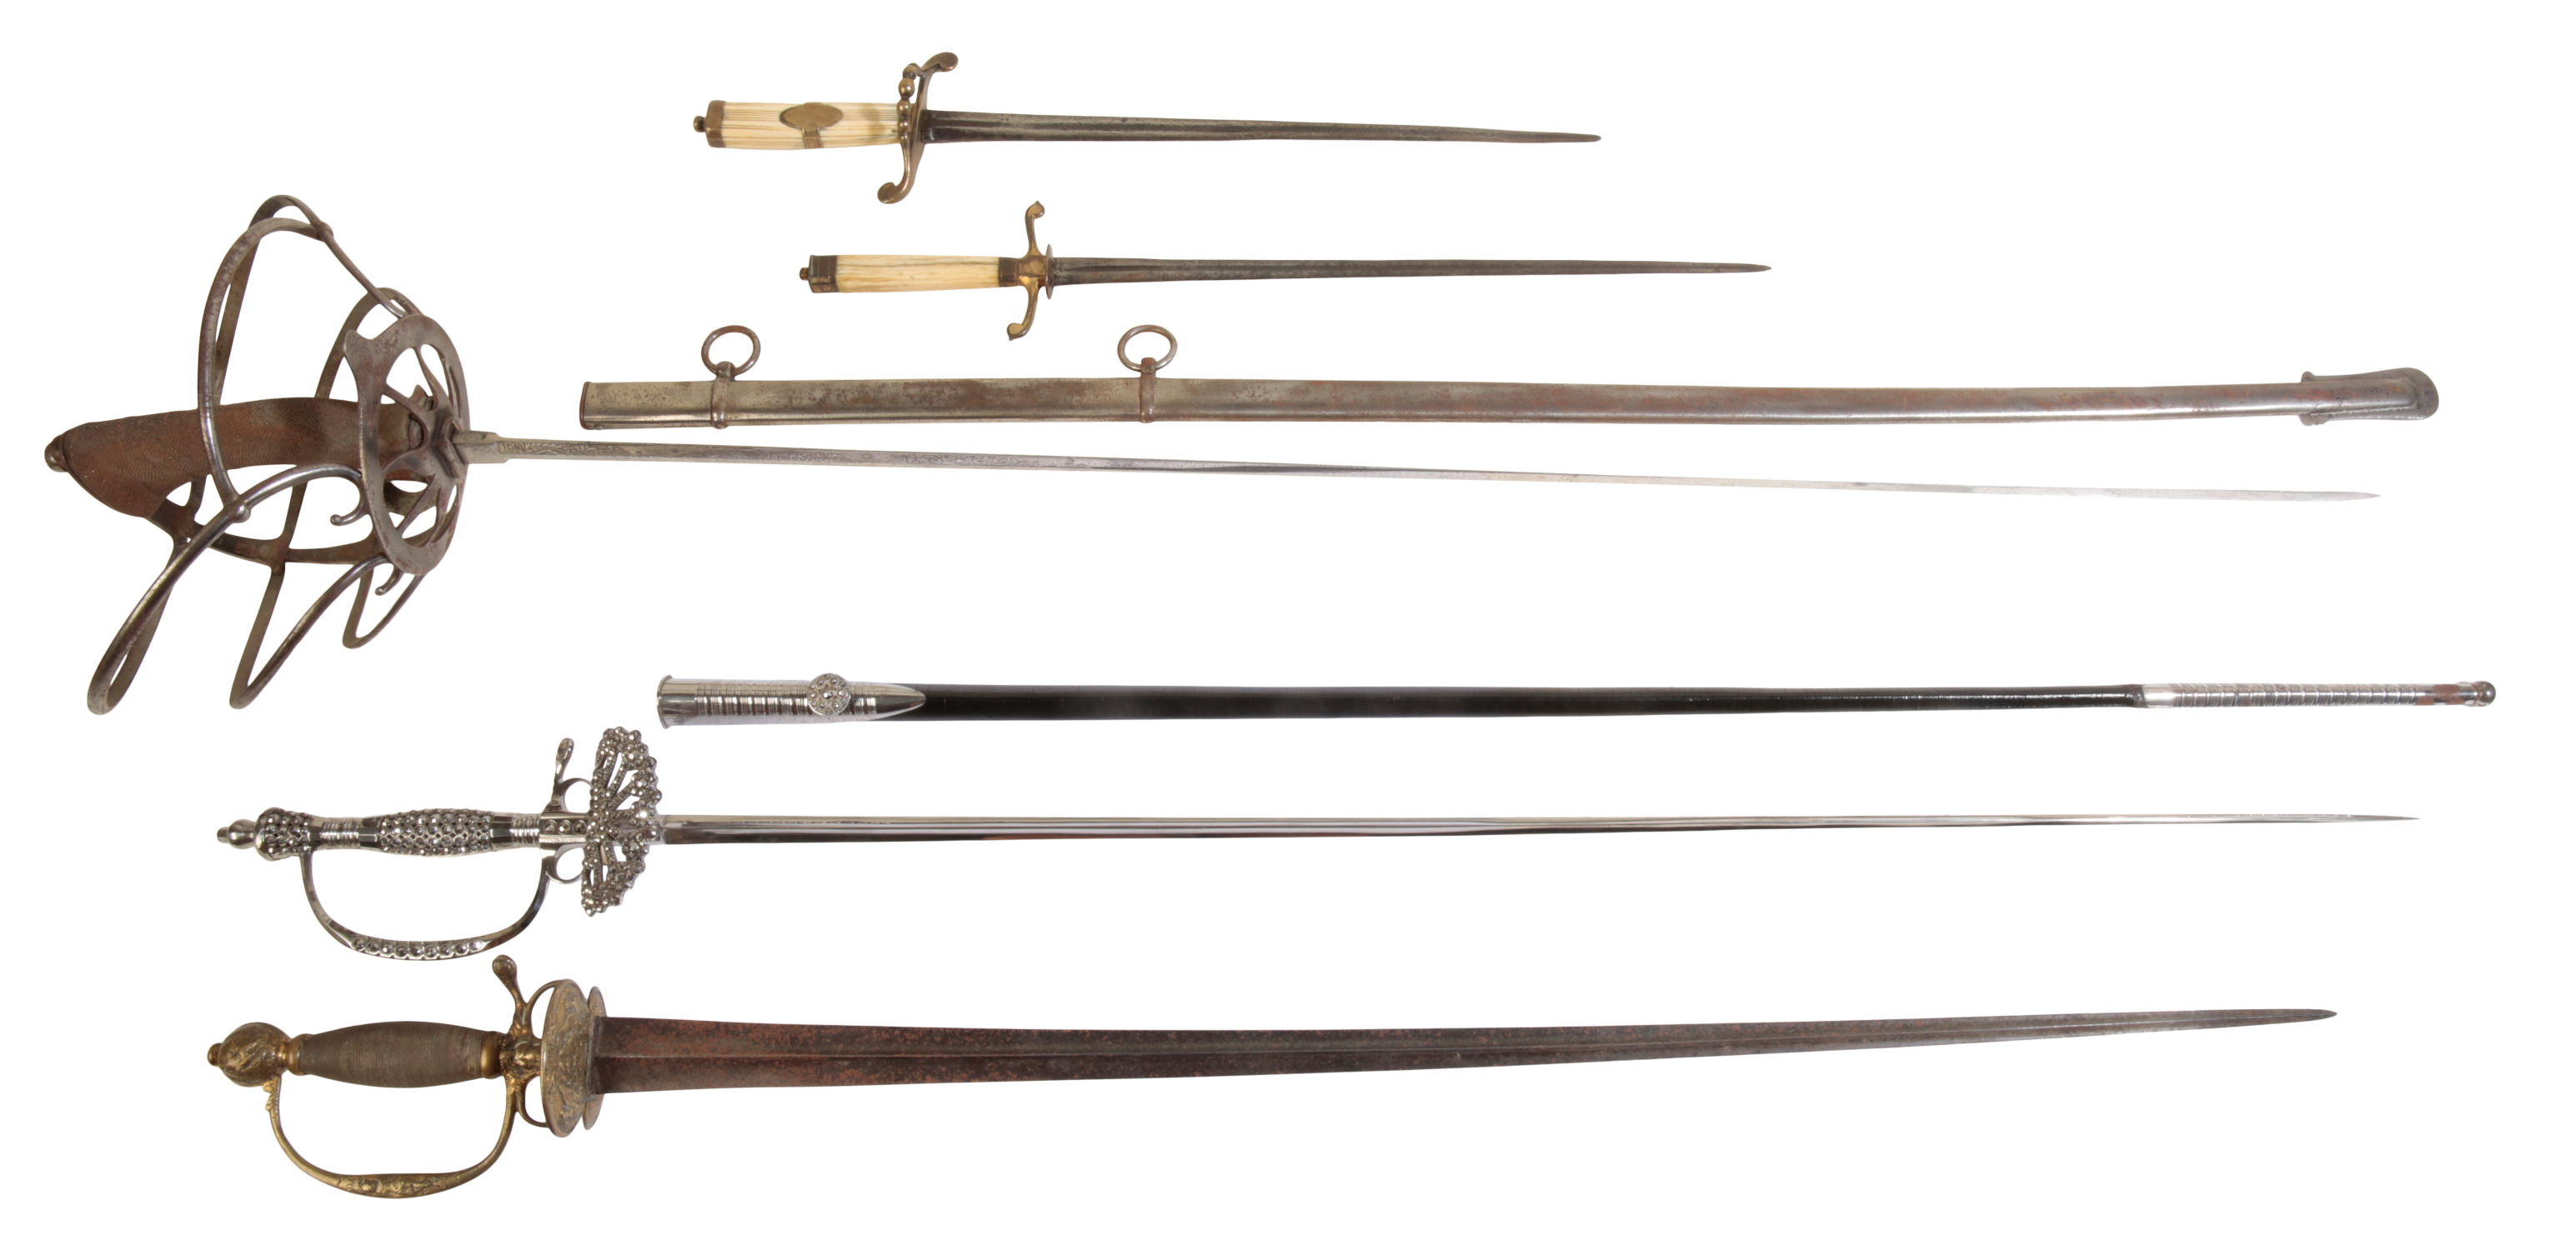 A LATE 19TH CENTURY COURT SWORD